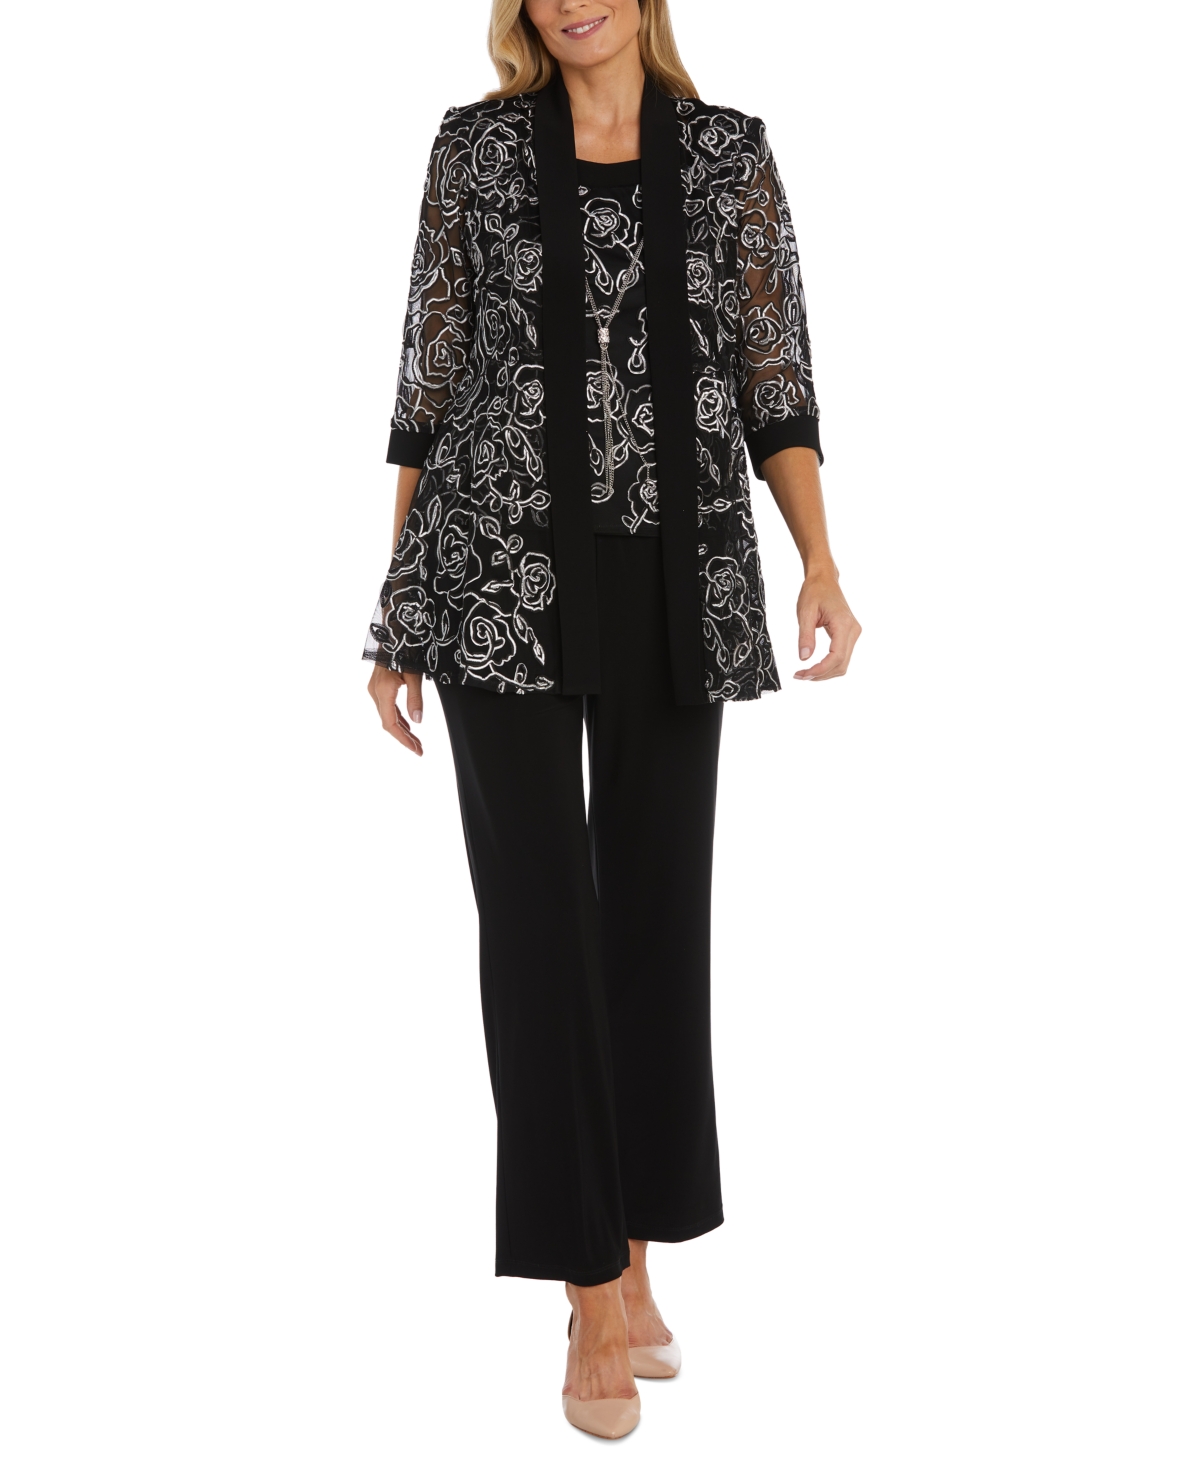 R & M Richards Plus Size 3-pc. Embroidered Jacket, Top & Pants Set In Black White